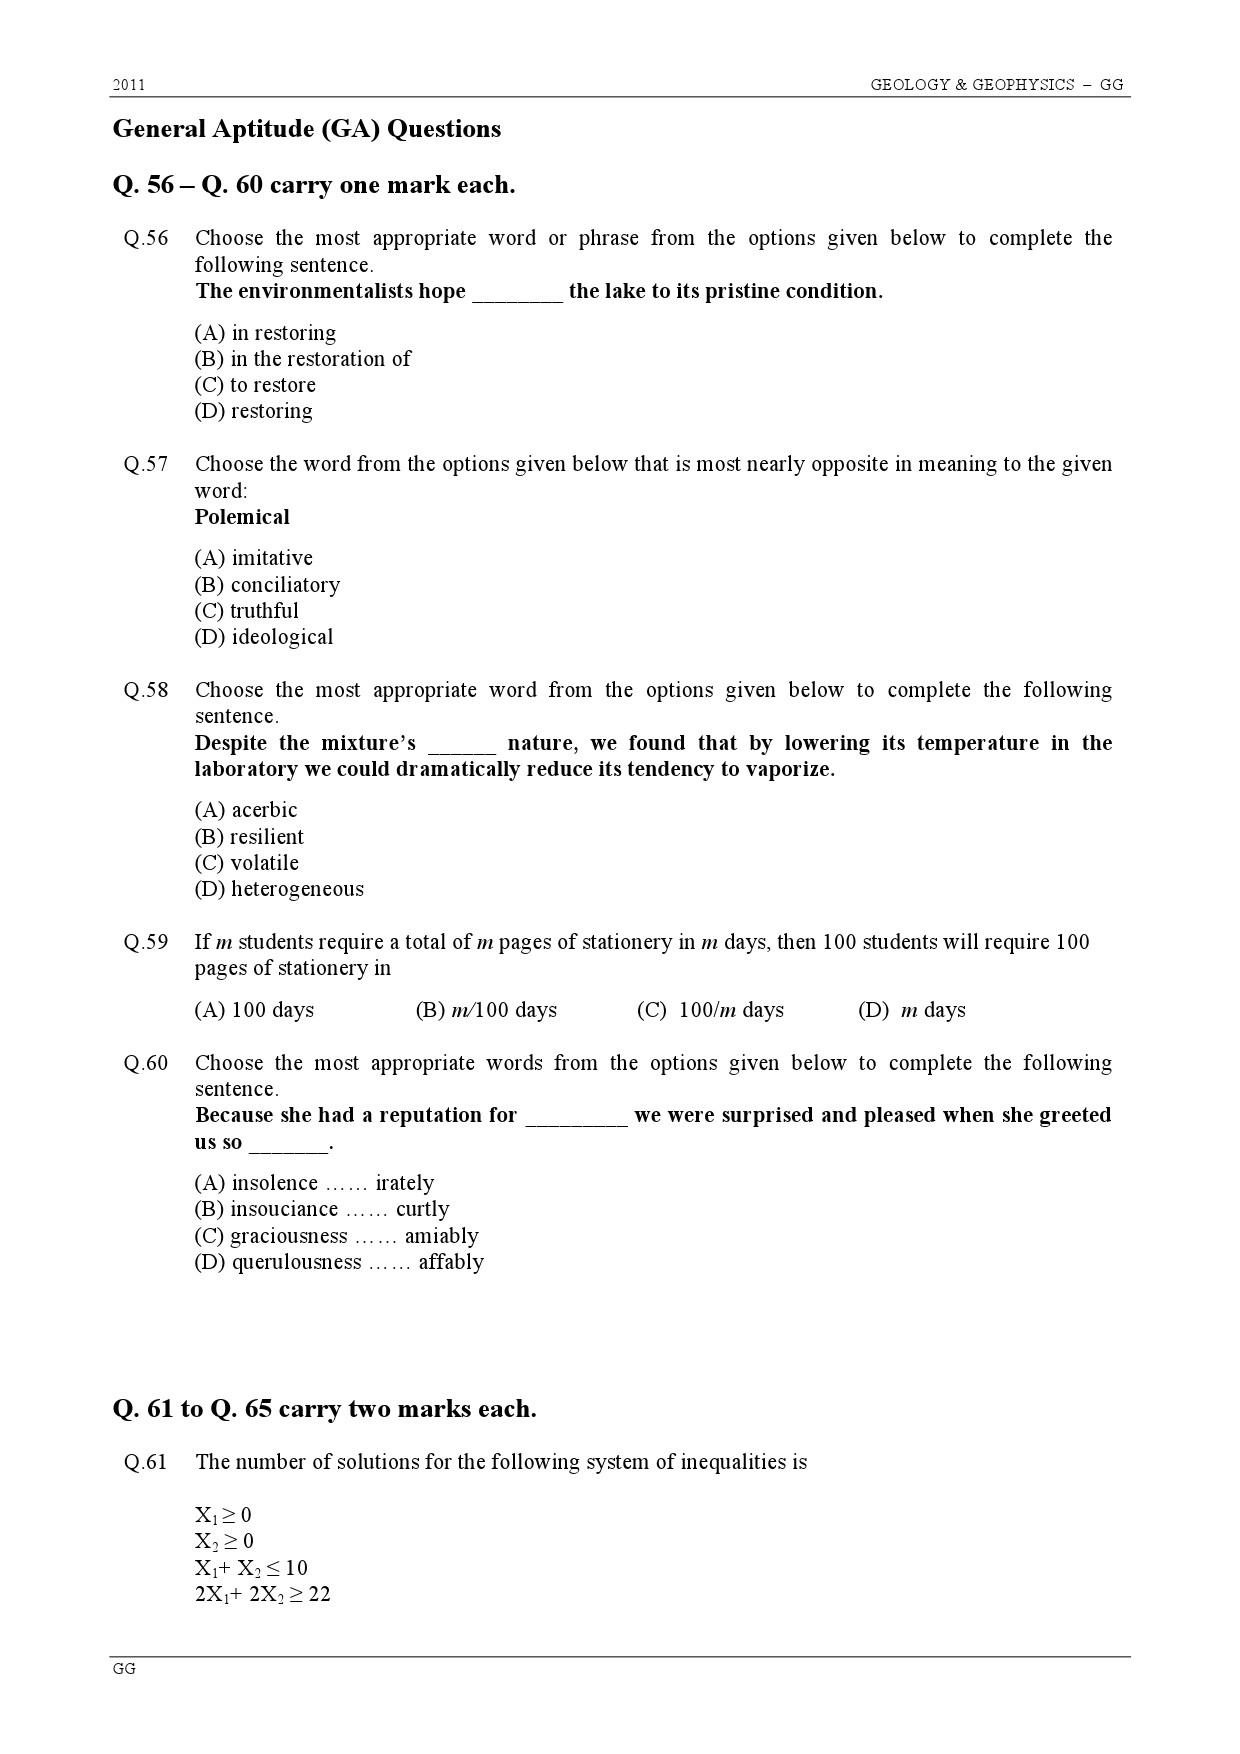 GATE Exam Question Paper 2011 Geology and Geophysics 17